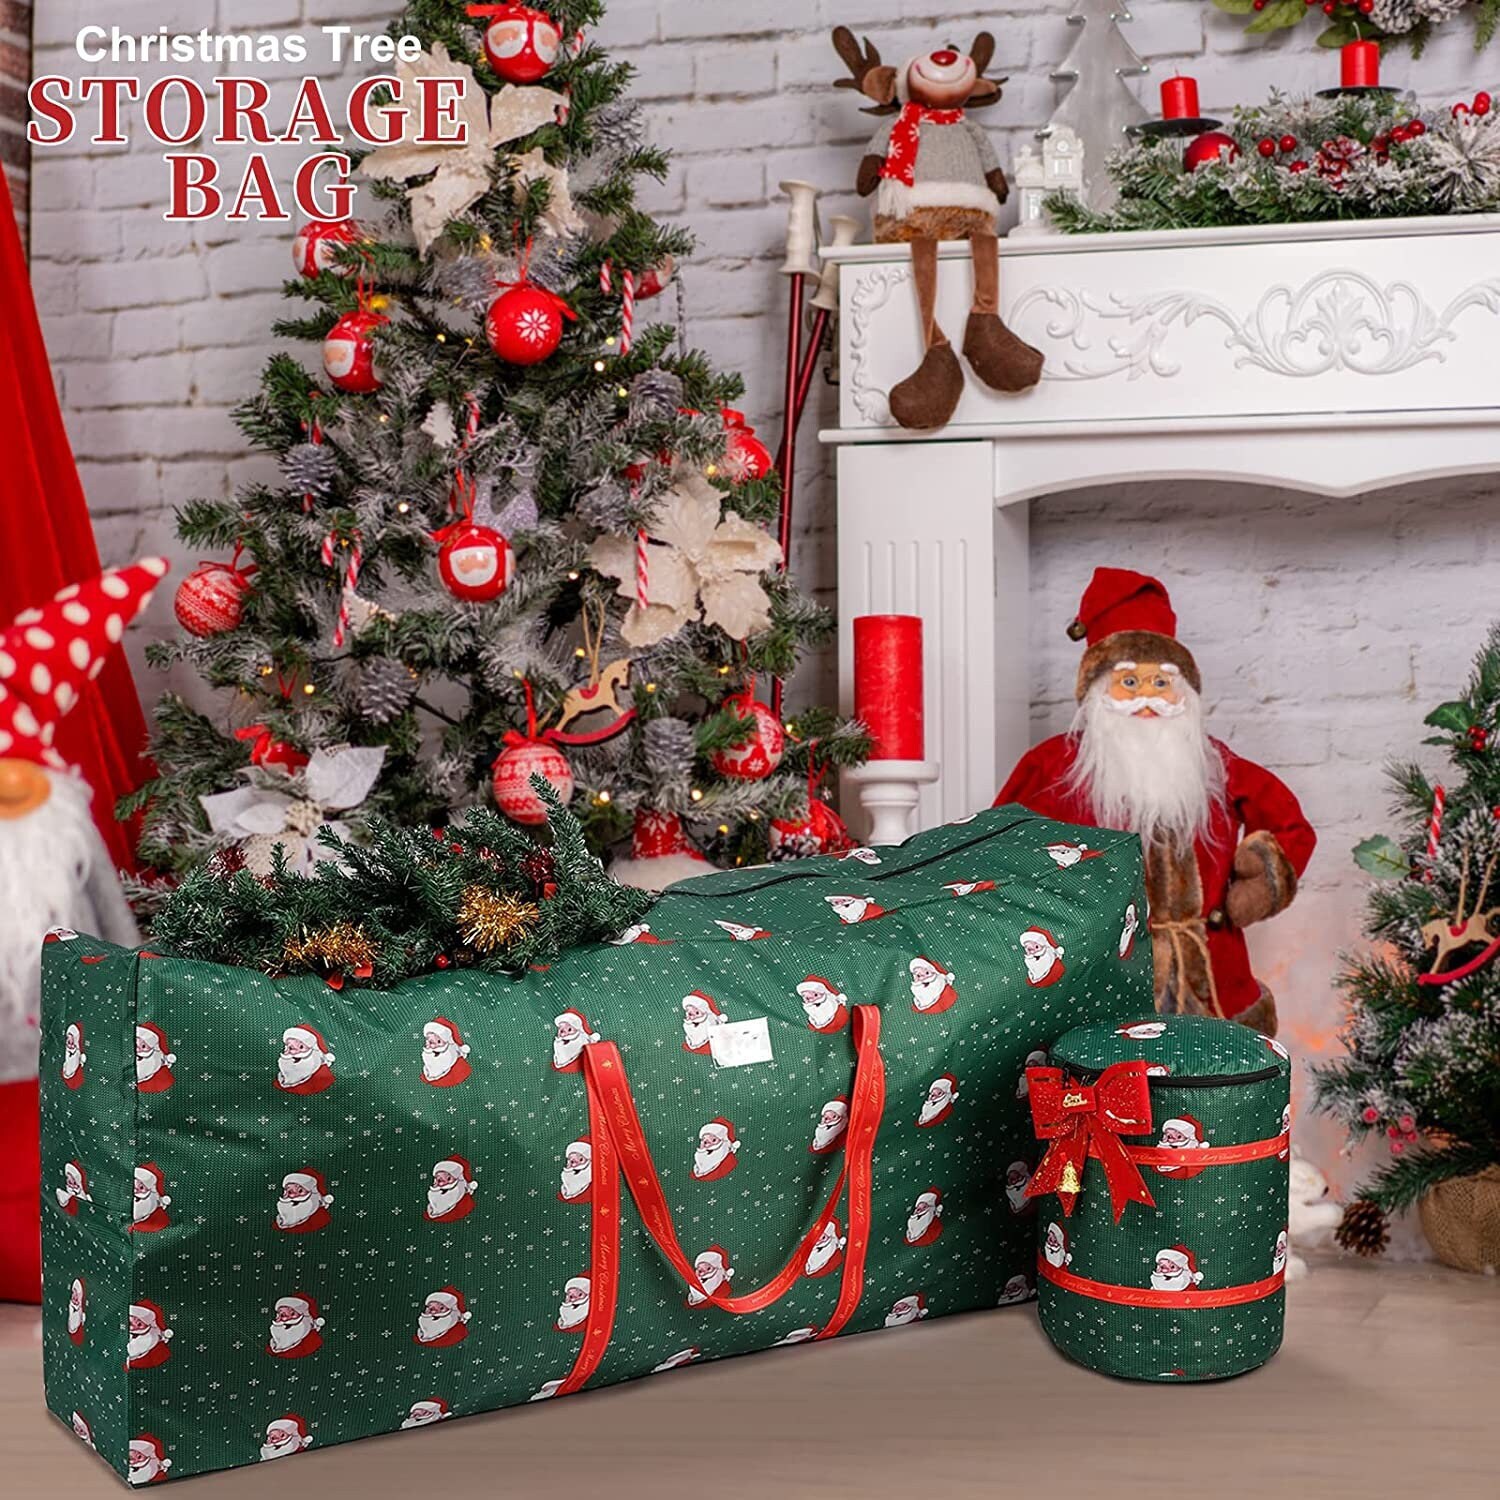 Hearth & Harbor Plastic Christmas Tree Storage Bag - Large Christmas Tree  Storage Box Container Made from Durable Waterproof Fabric with Handles 